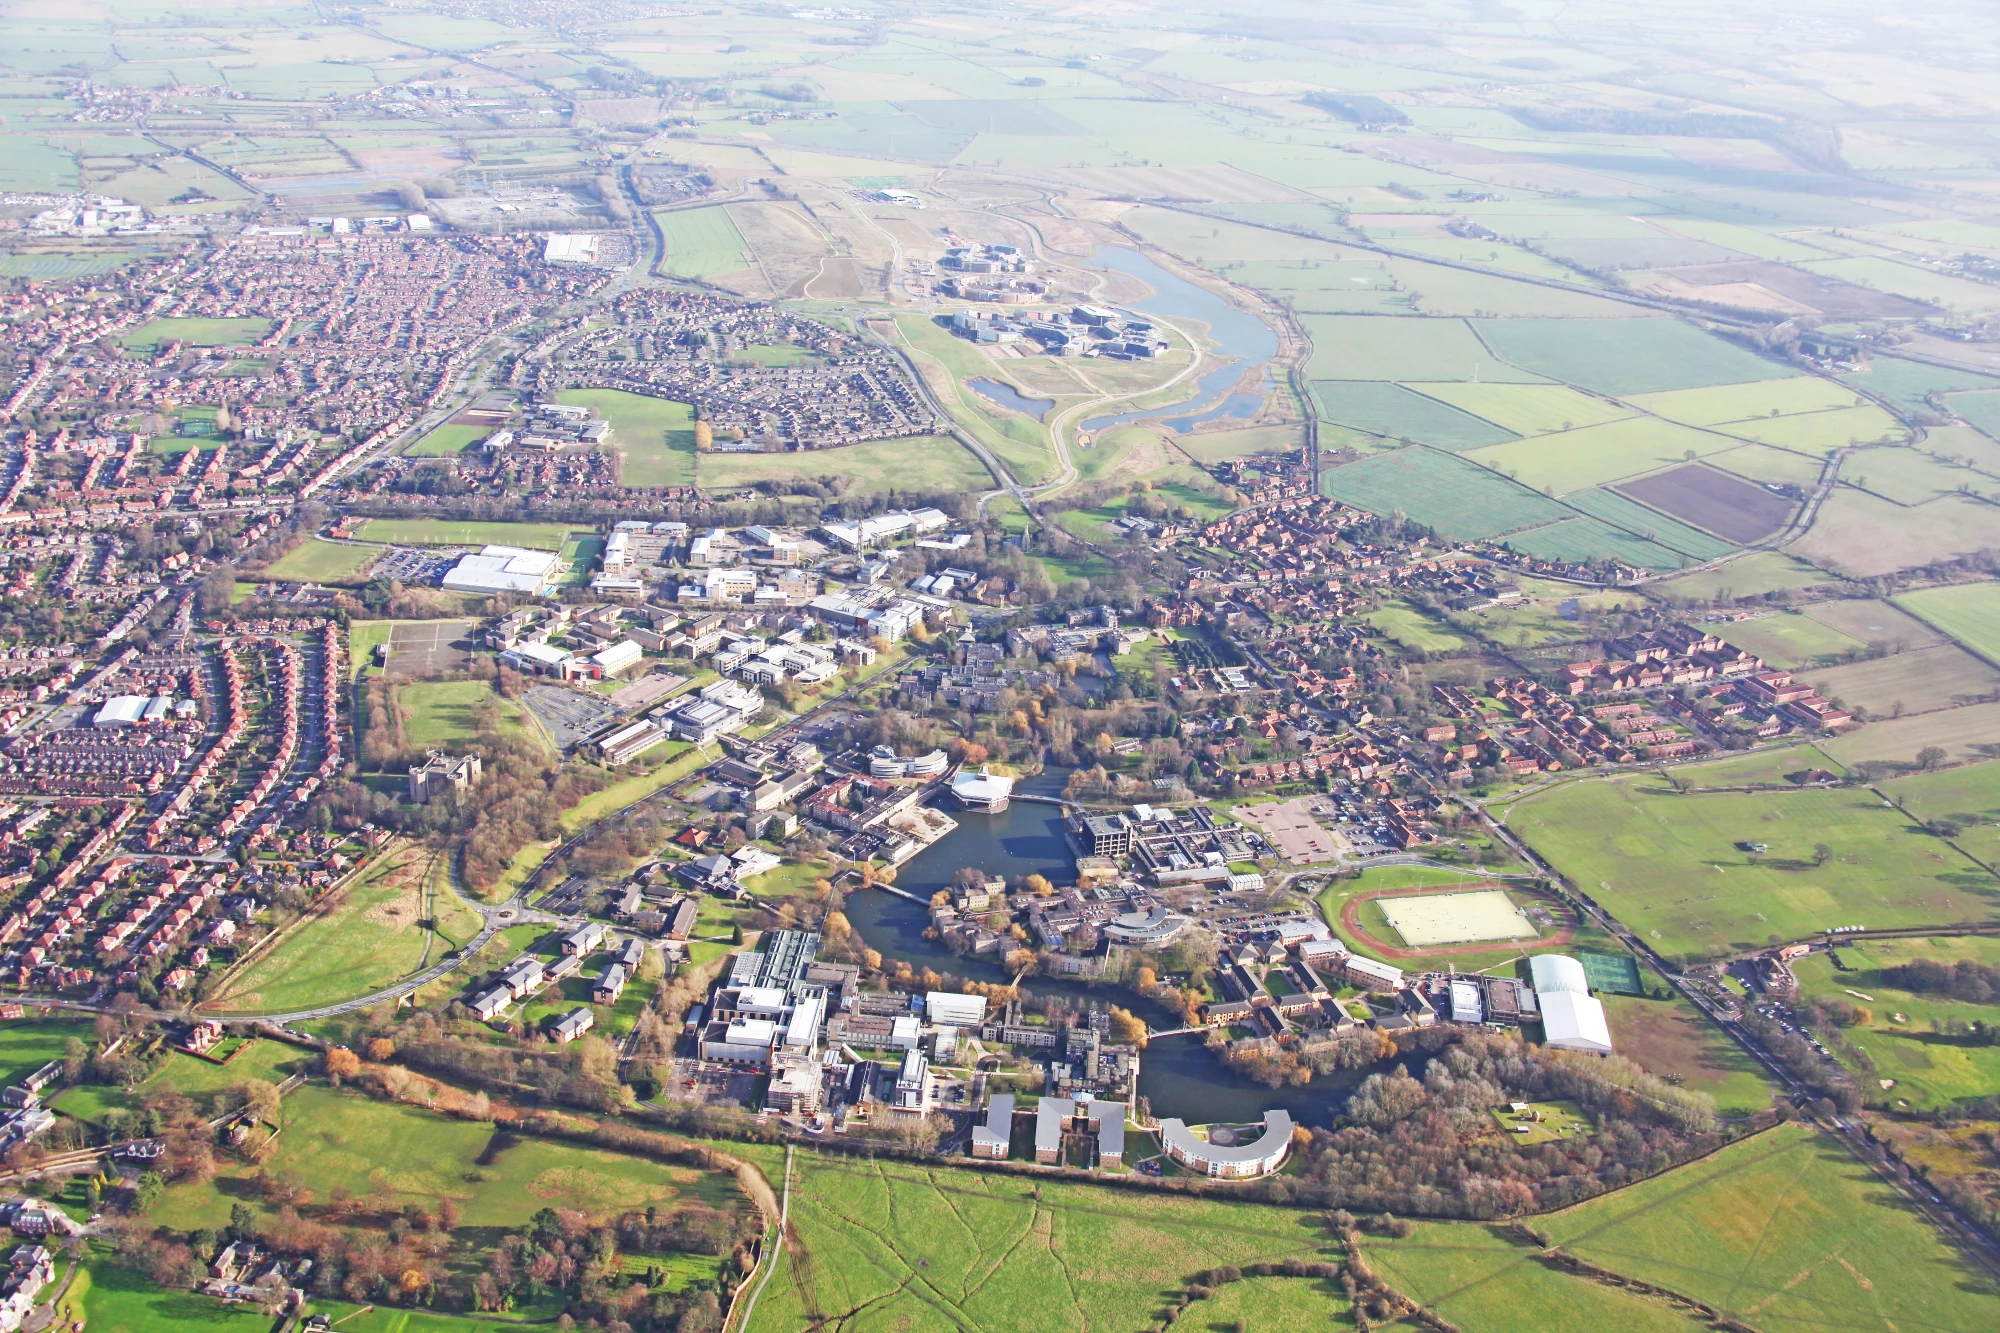 Helicopter view of the University of York campus